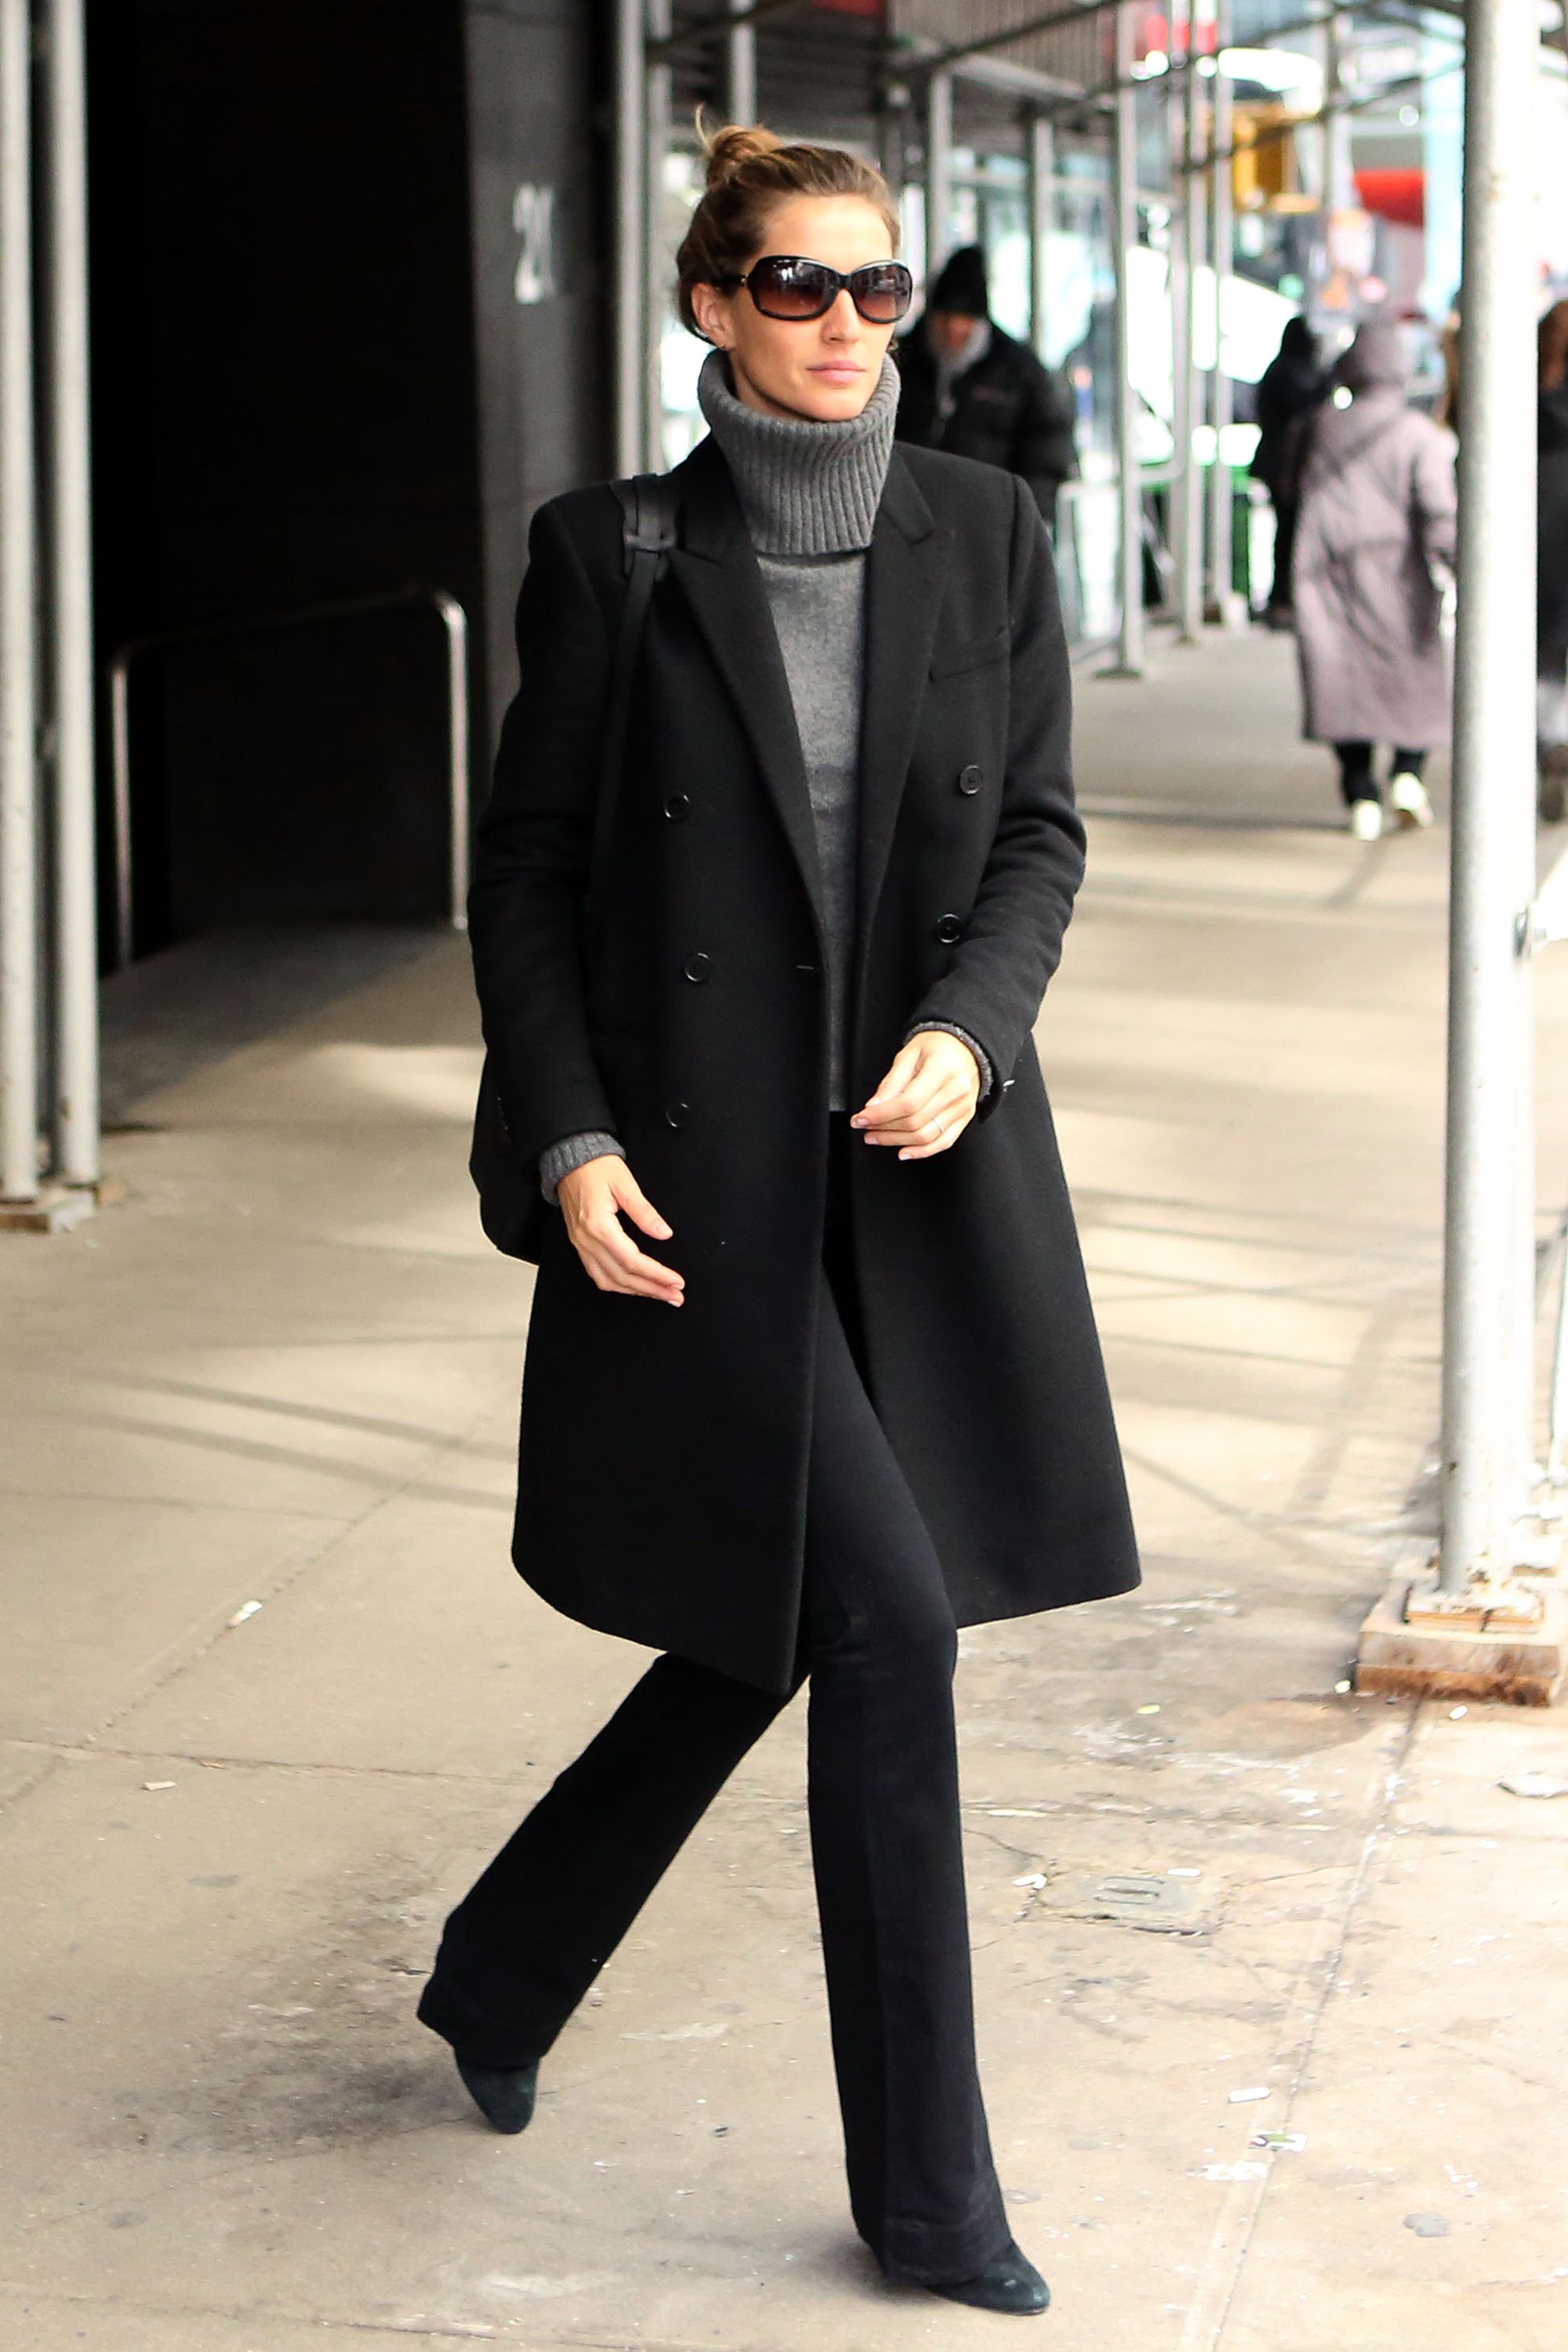 50 Turtleneck Outfits For A Chic Winter Look How To Wear A Turtleneck ...